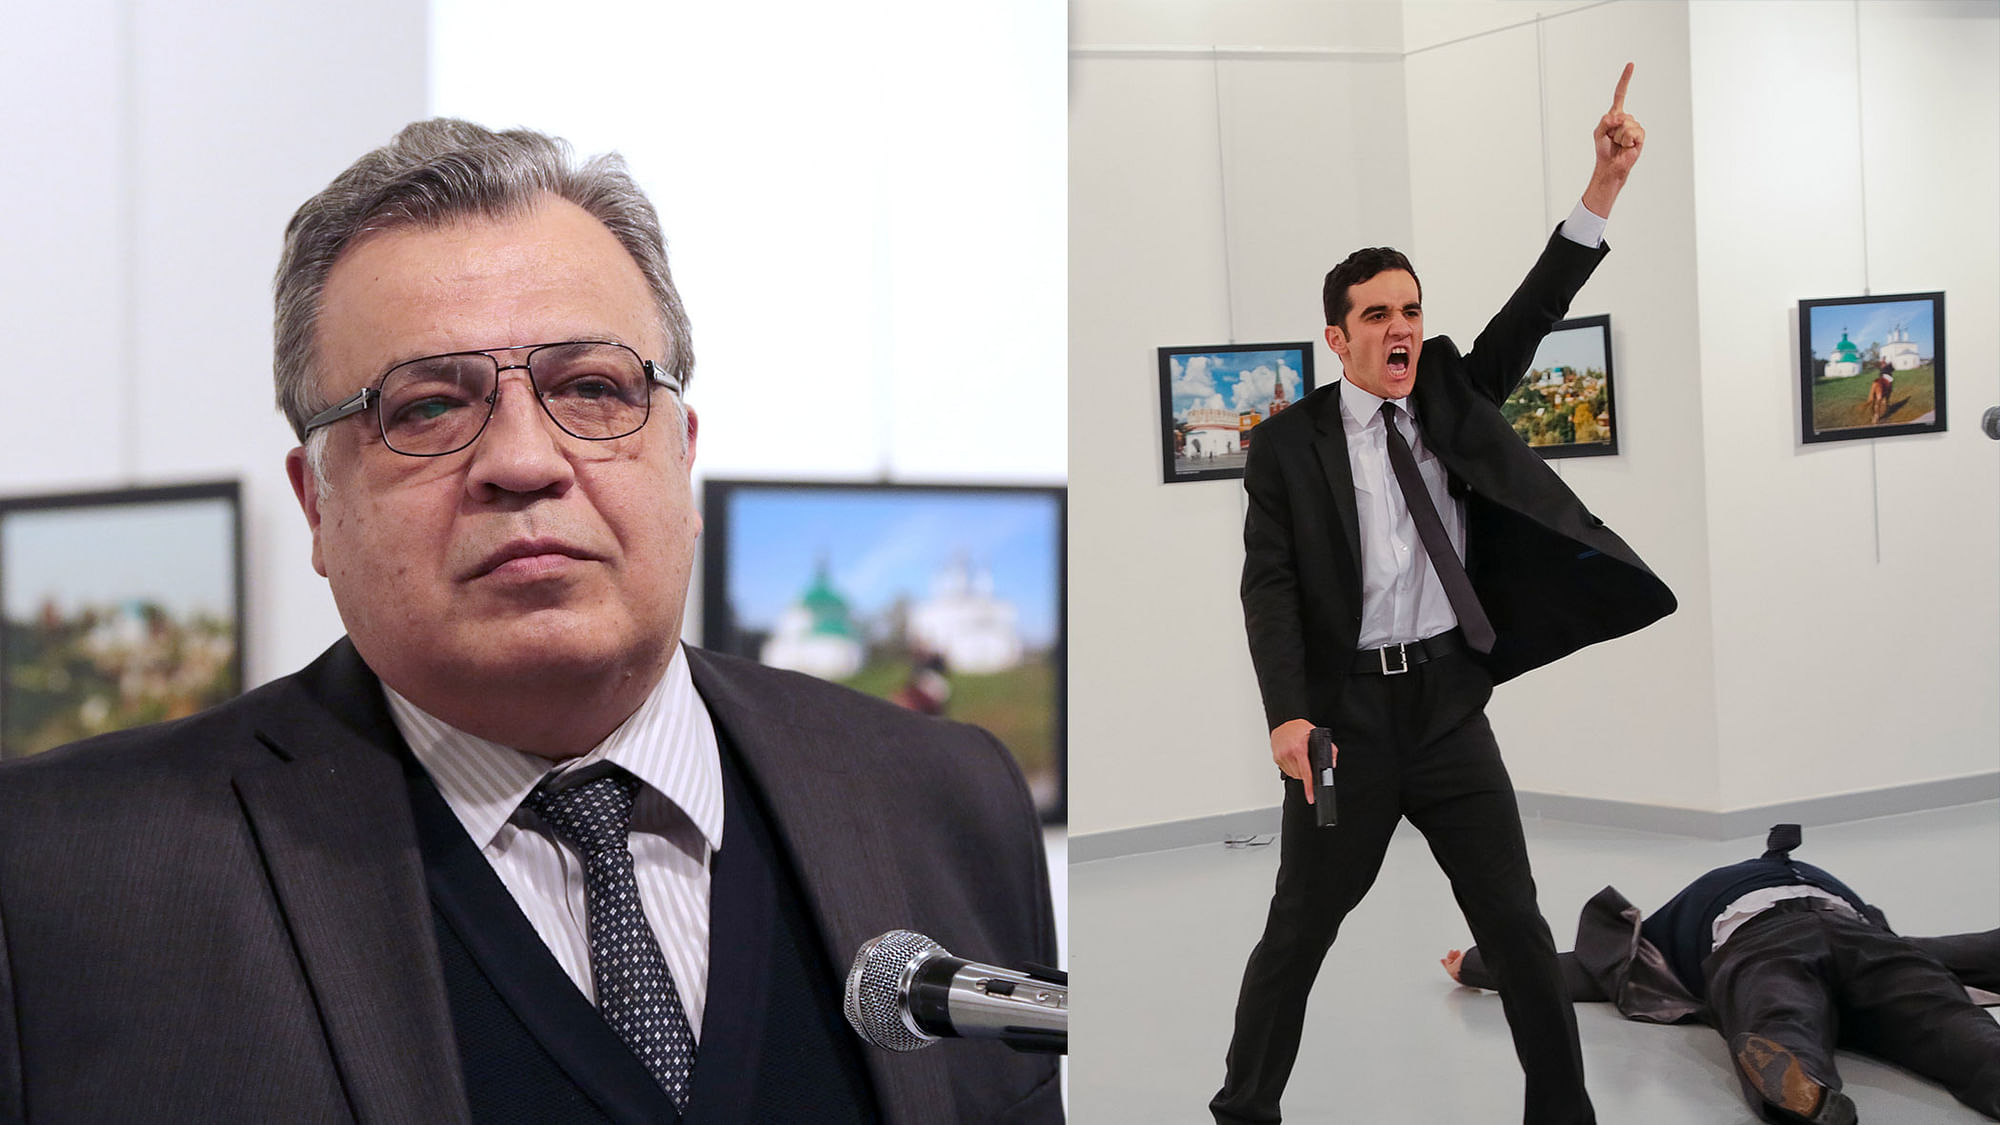 The Russian Ambassador to Turkey Andrei Karlov was shot dead at an art gallery in Ankara (Photo: The Quint)